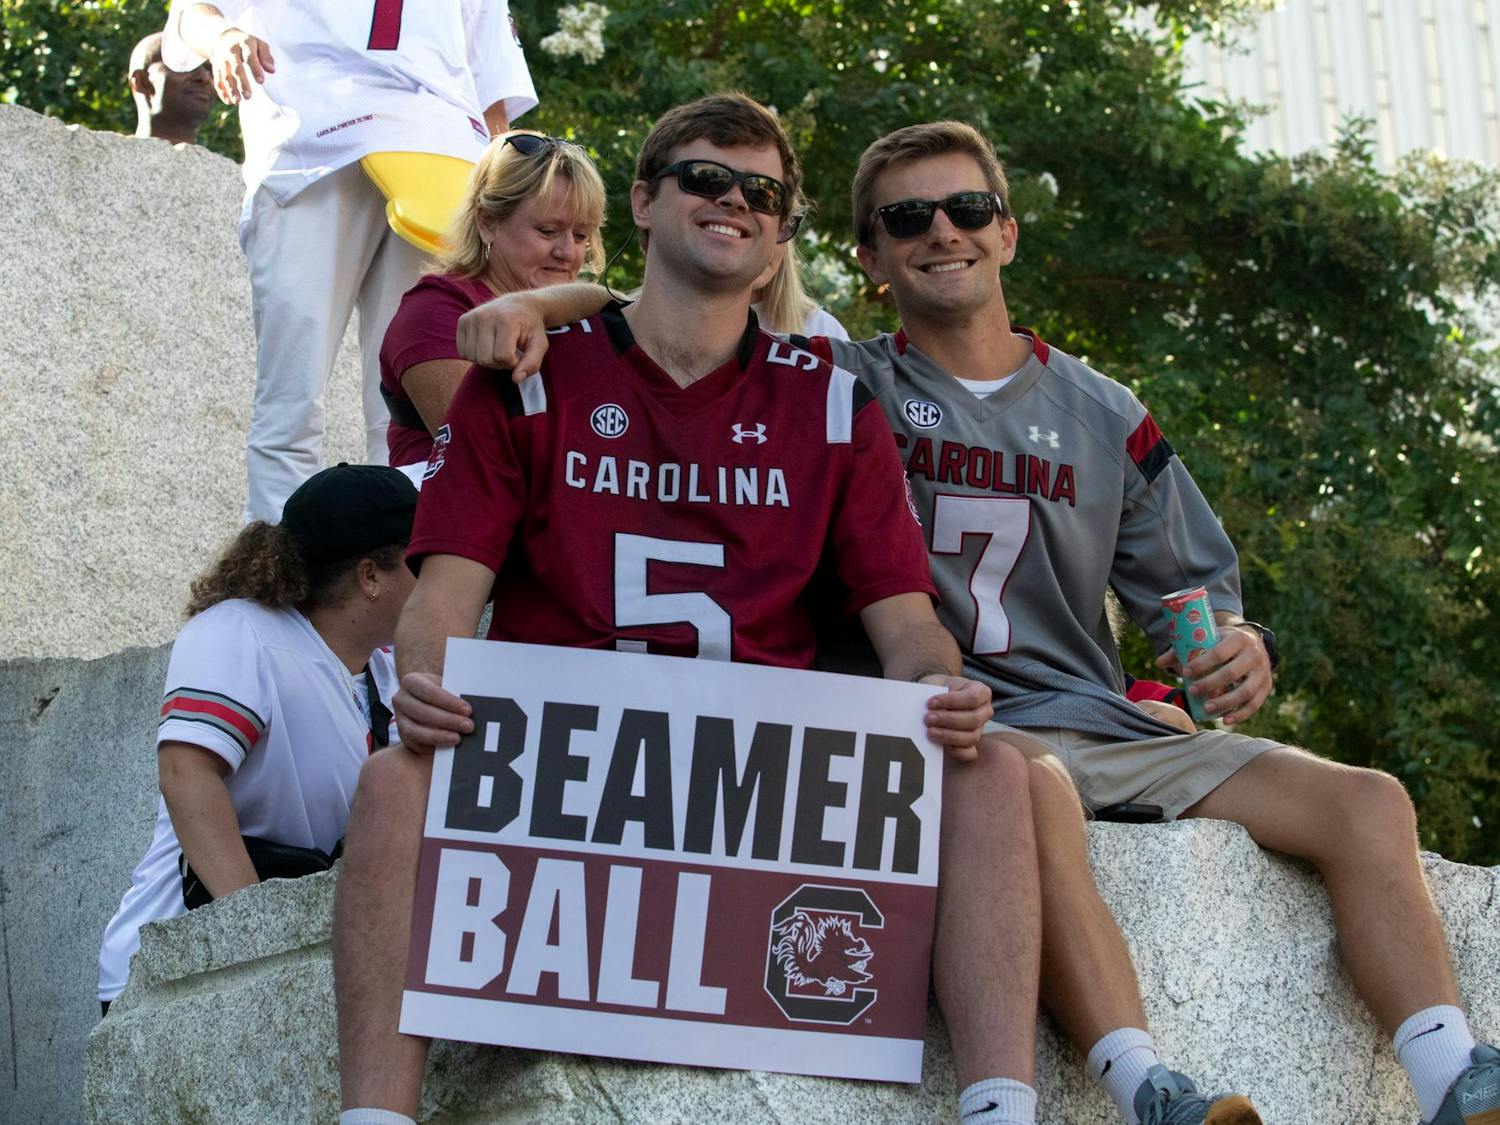 USC students Gavin Howley (left) and Thomas Gribben (right) holding a "Beamer Ball" sign at Romare Bearden Park ahead of College GameDay on Sept. 2, 2023. Howley and Gribben traveled to Charlotte to support the Gamecocks ahead of the Duke's Mayo Classic later in the day.